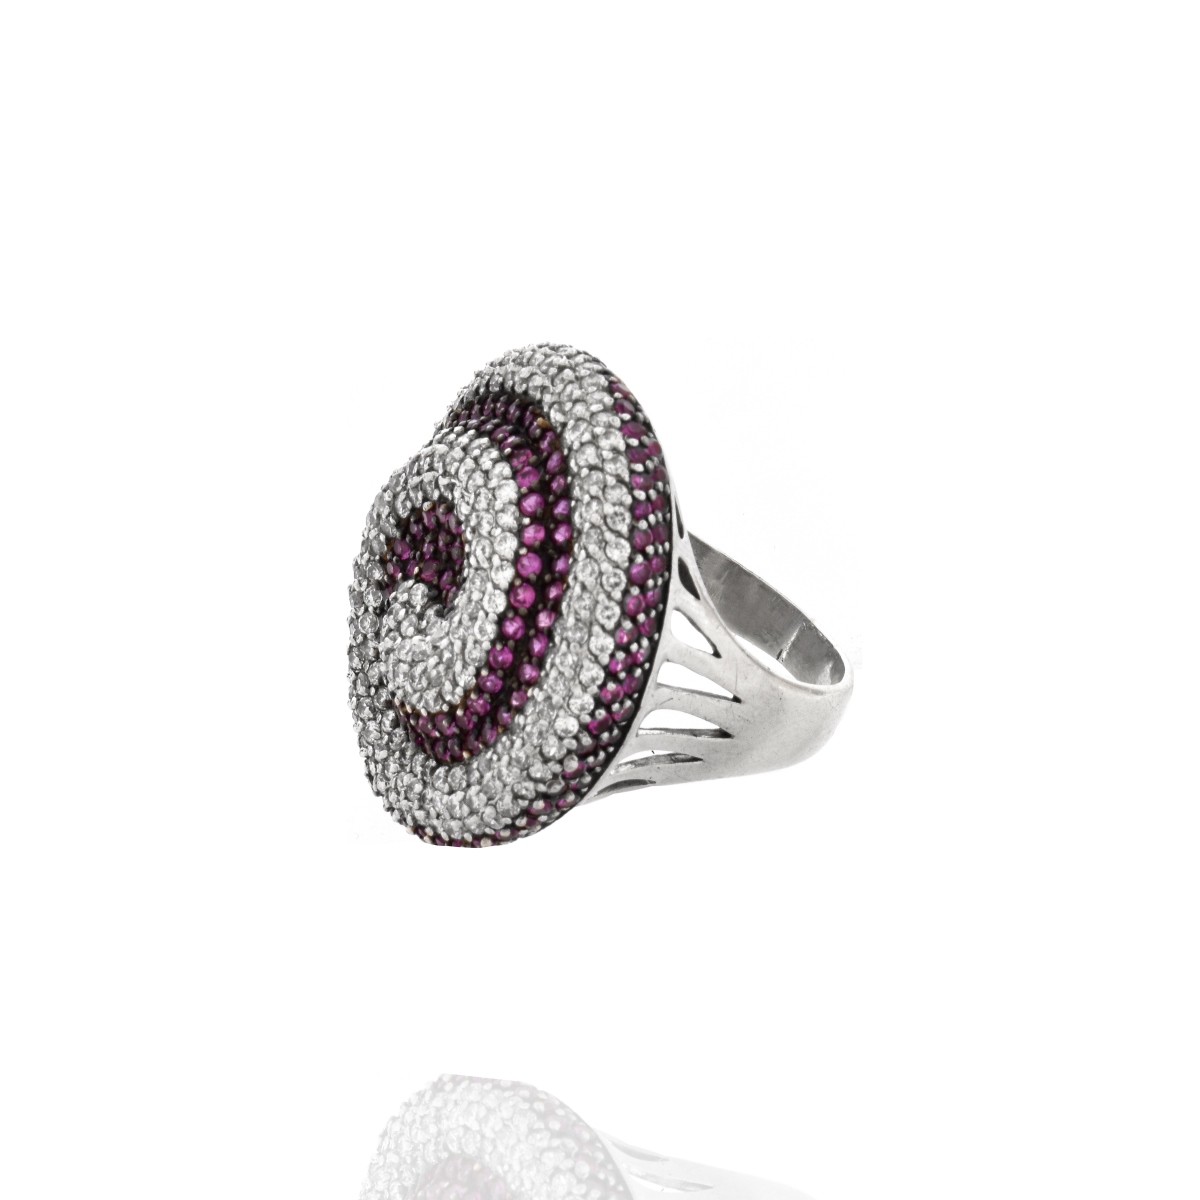 Diamond, Ruby and Silver Ring